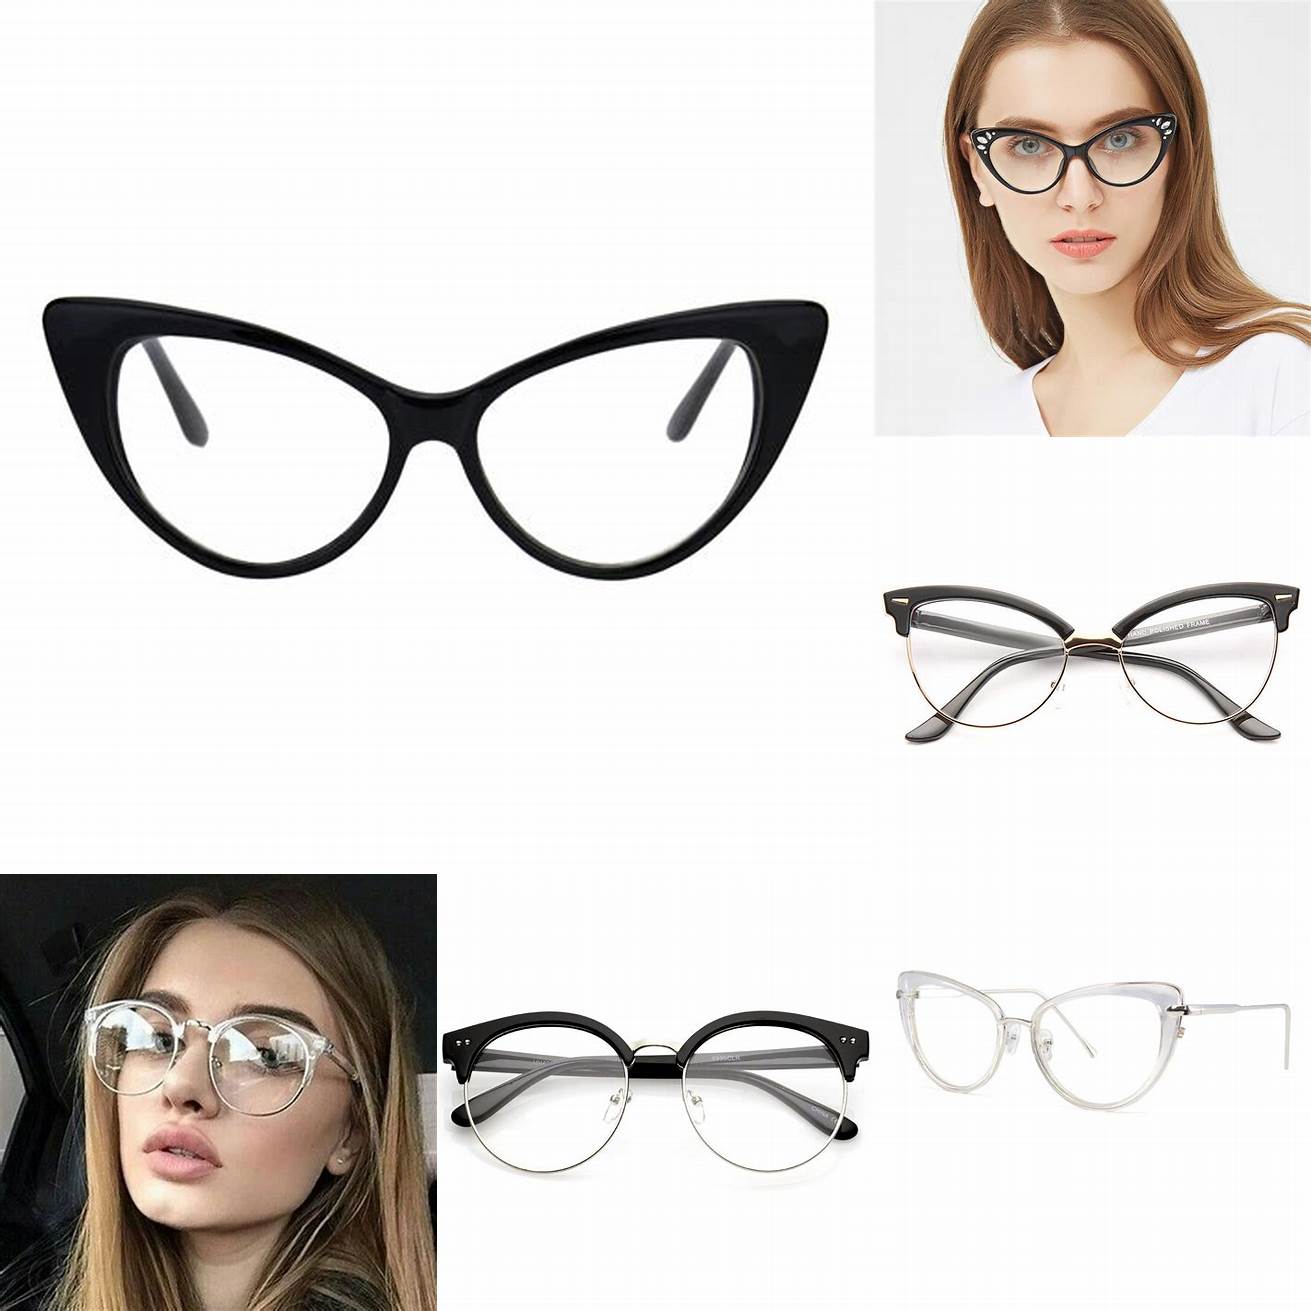 Cat eye glasses with clear lenses